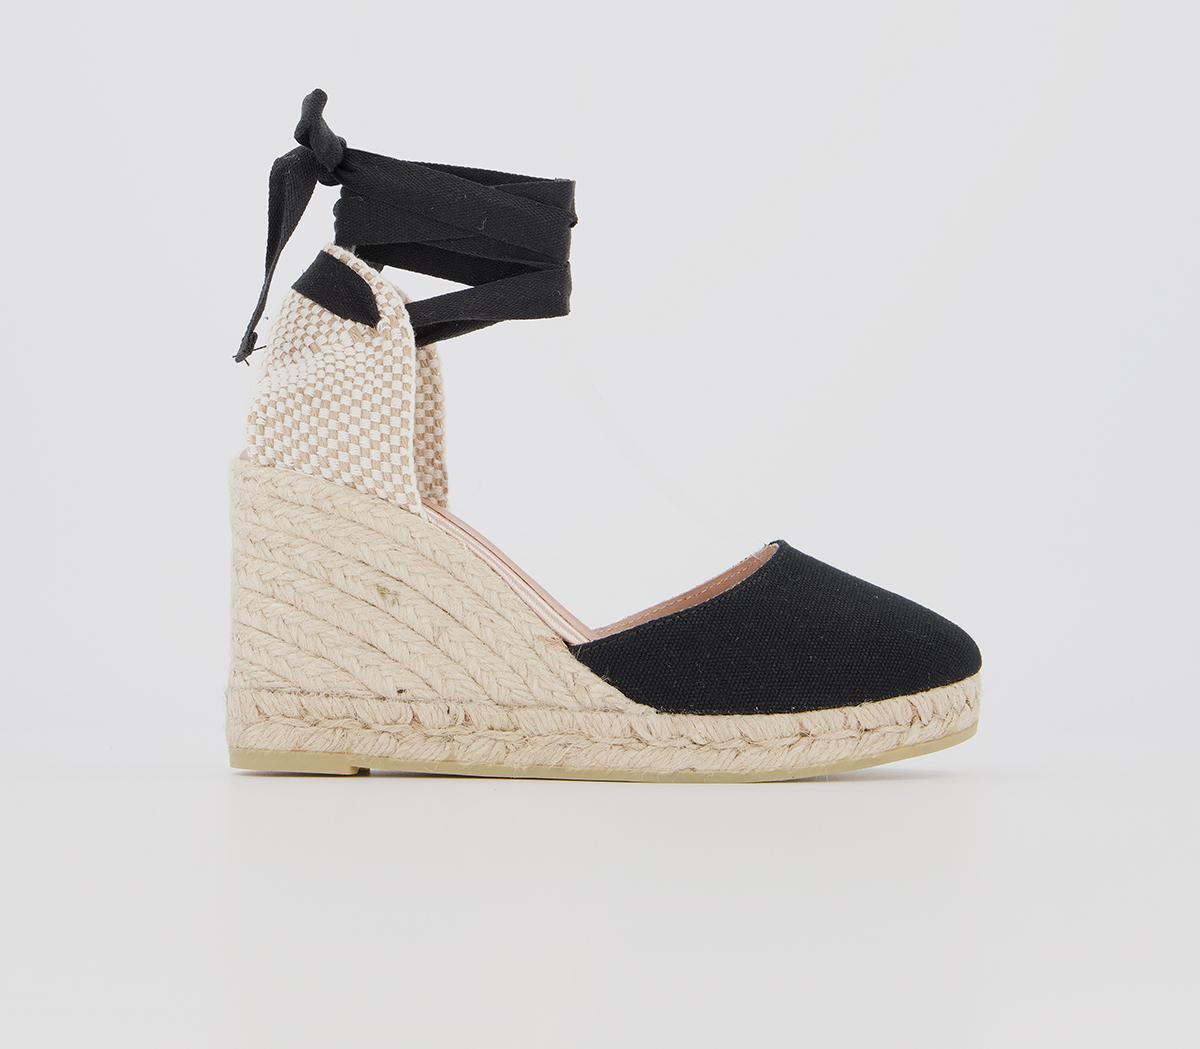 Gaimo for OFFICEAnkle Wrap Espadrille WedgesBlack Canvas Rose Gold Rand